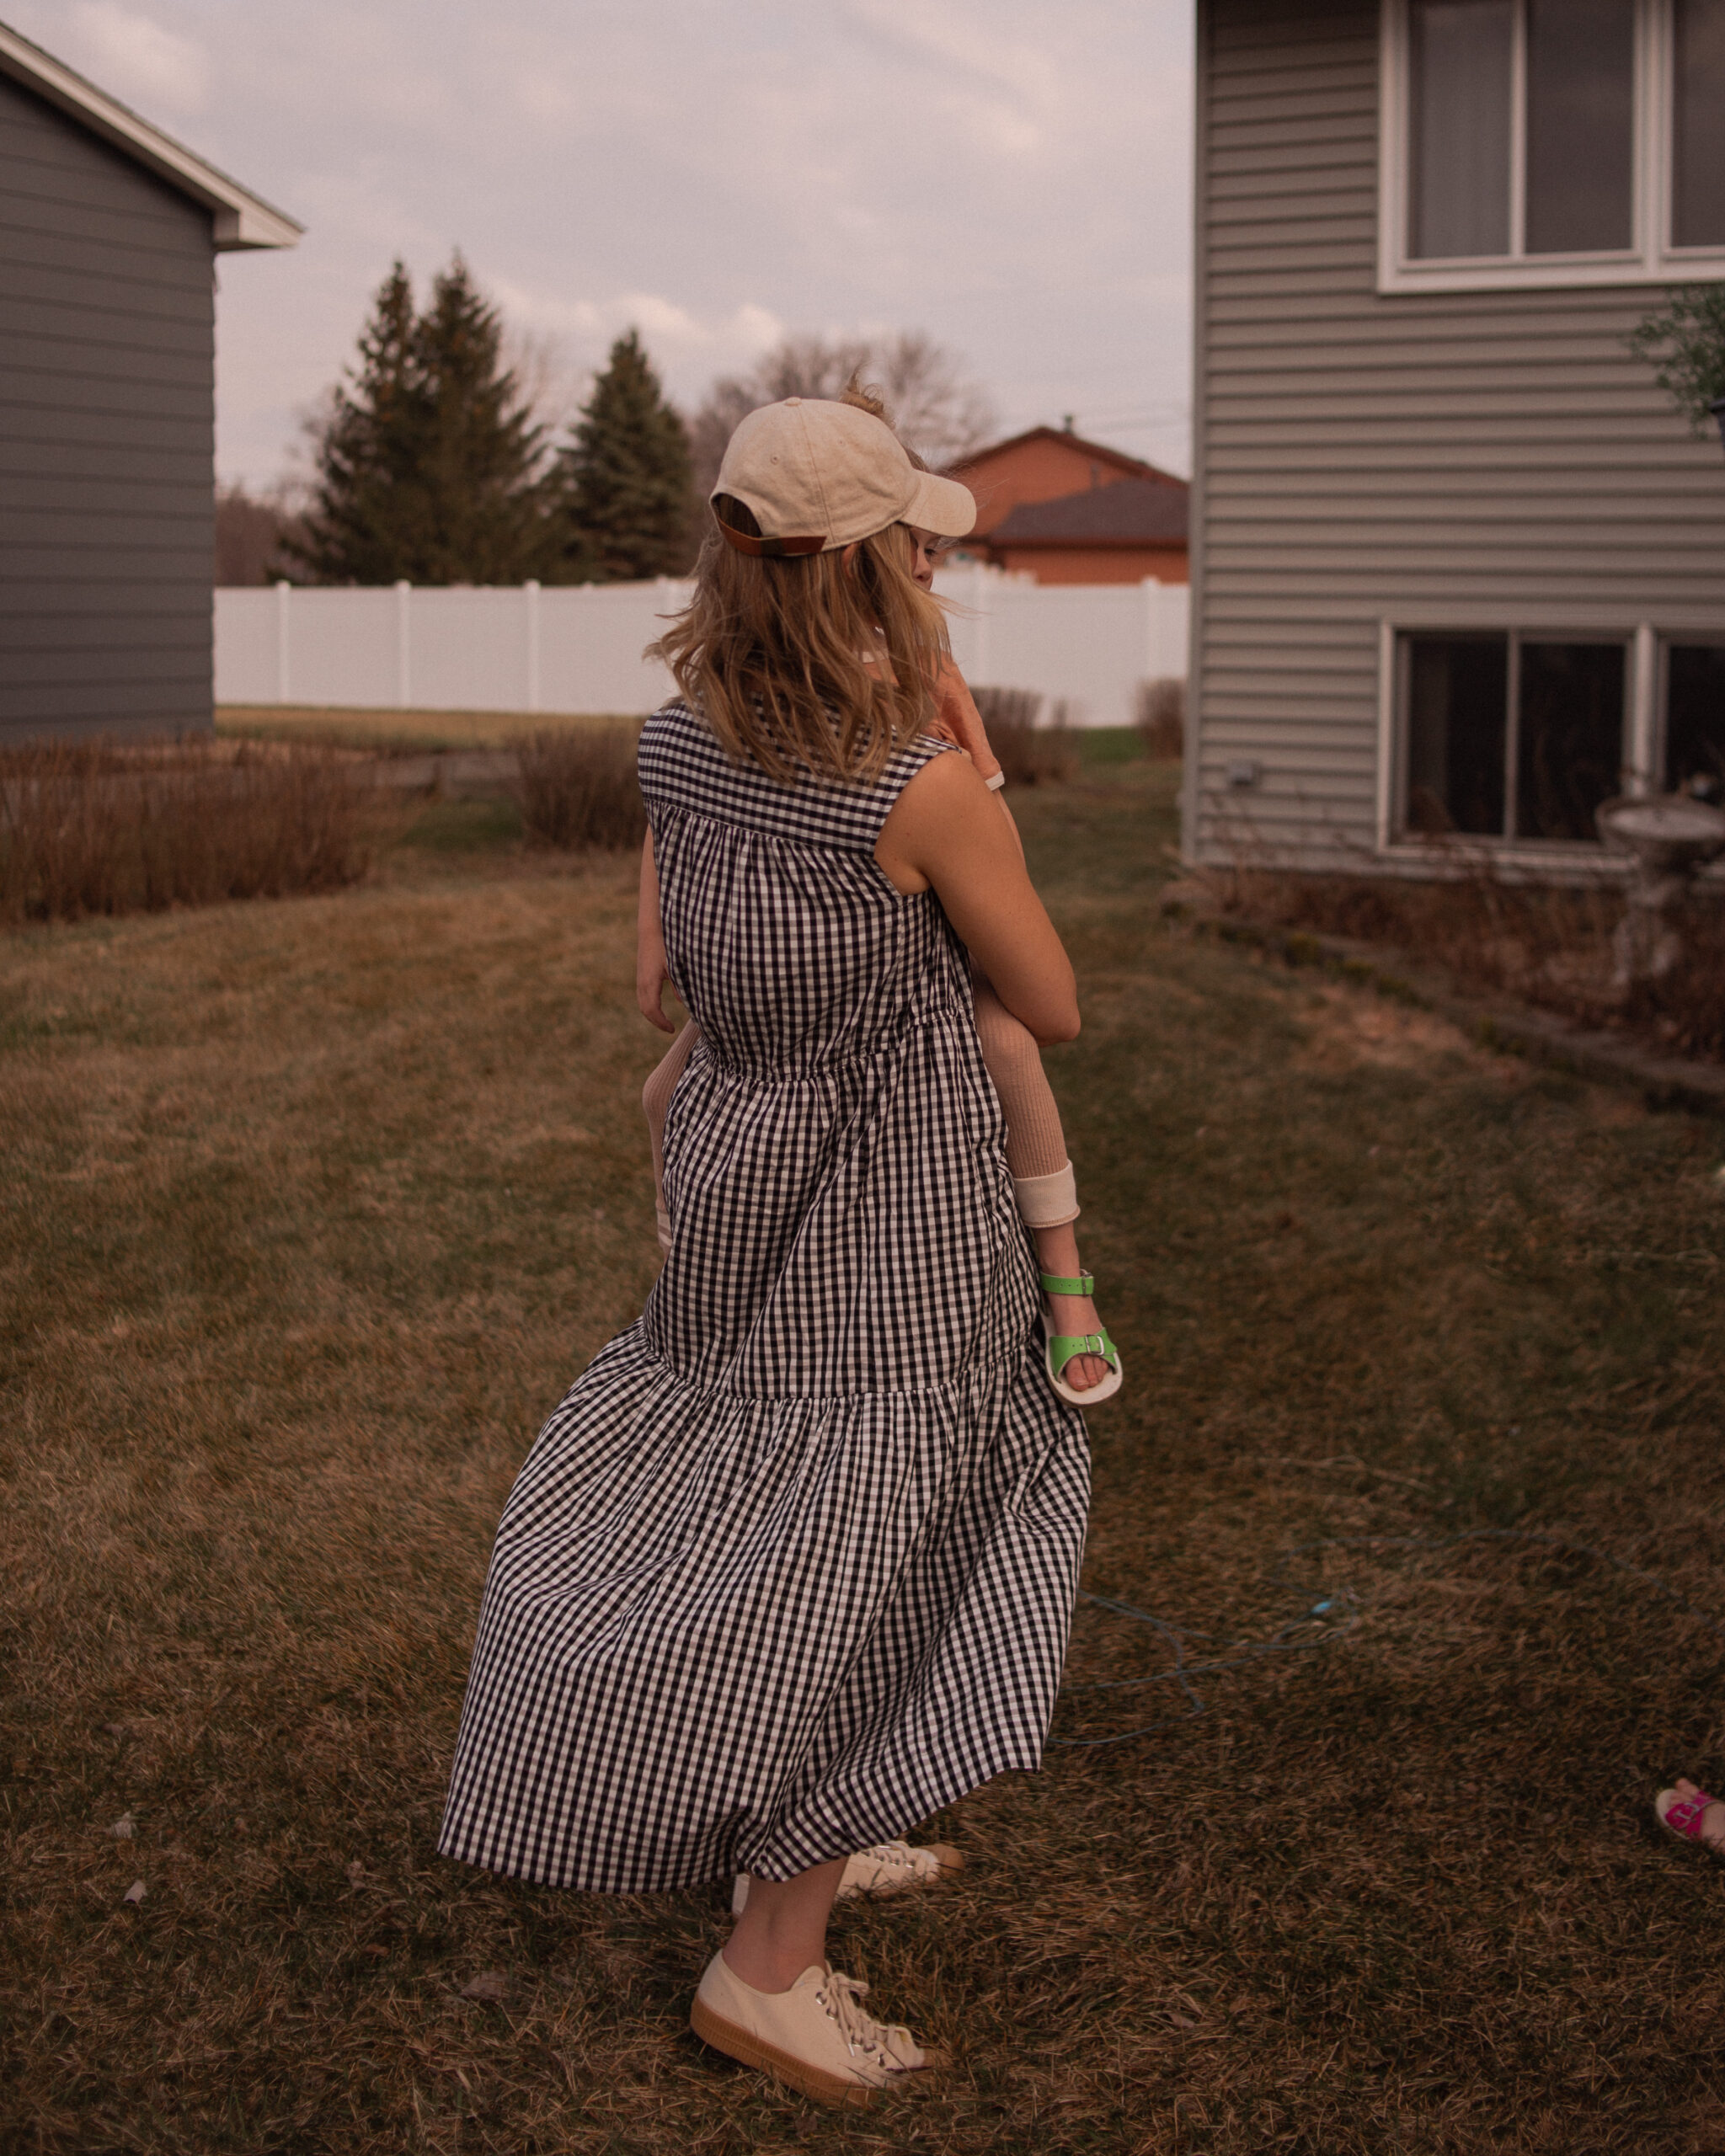 Karin Emily wears a gingham maxi dress from Everlane with canvas sneakers and a neutral baseball hat